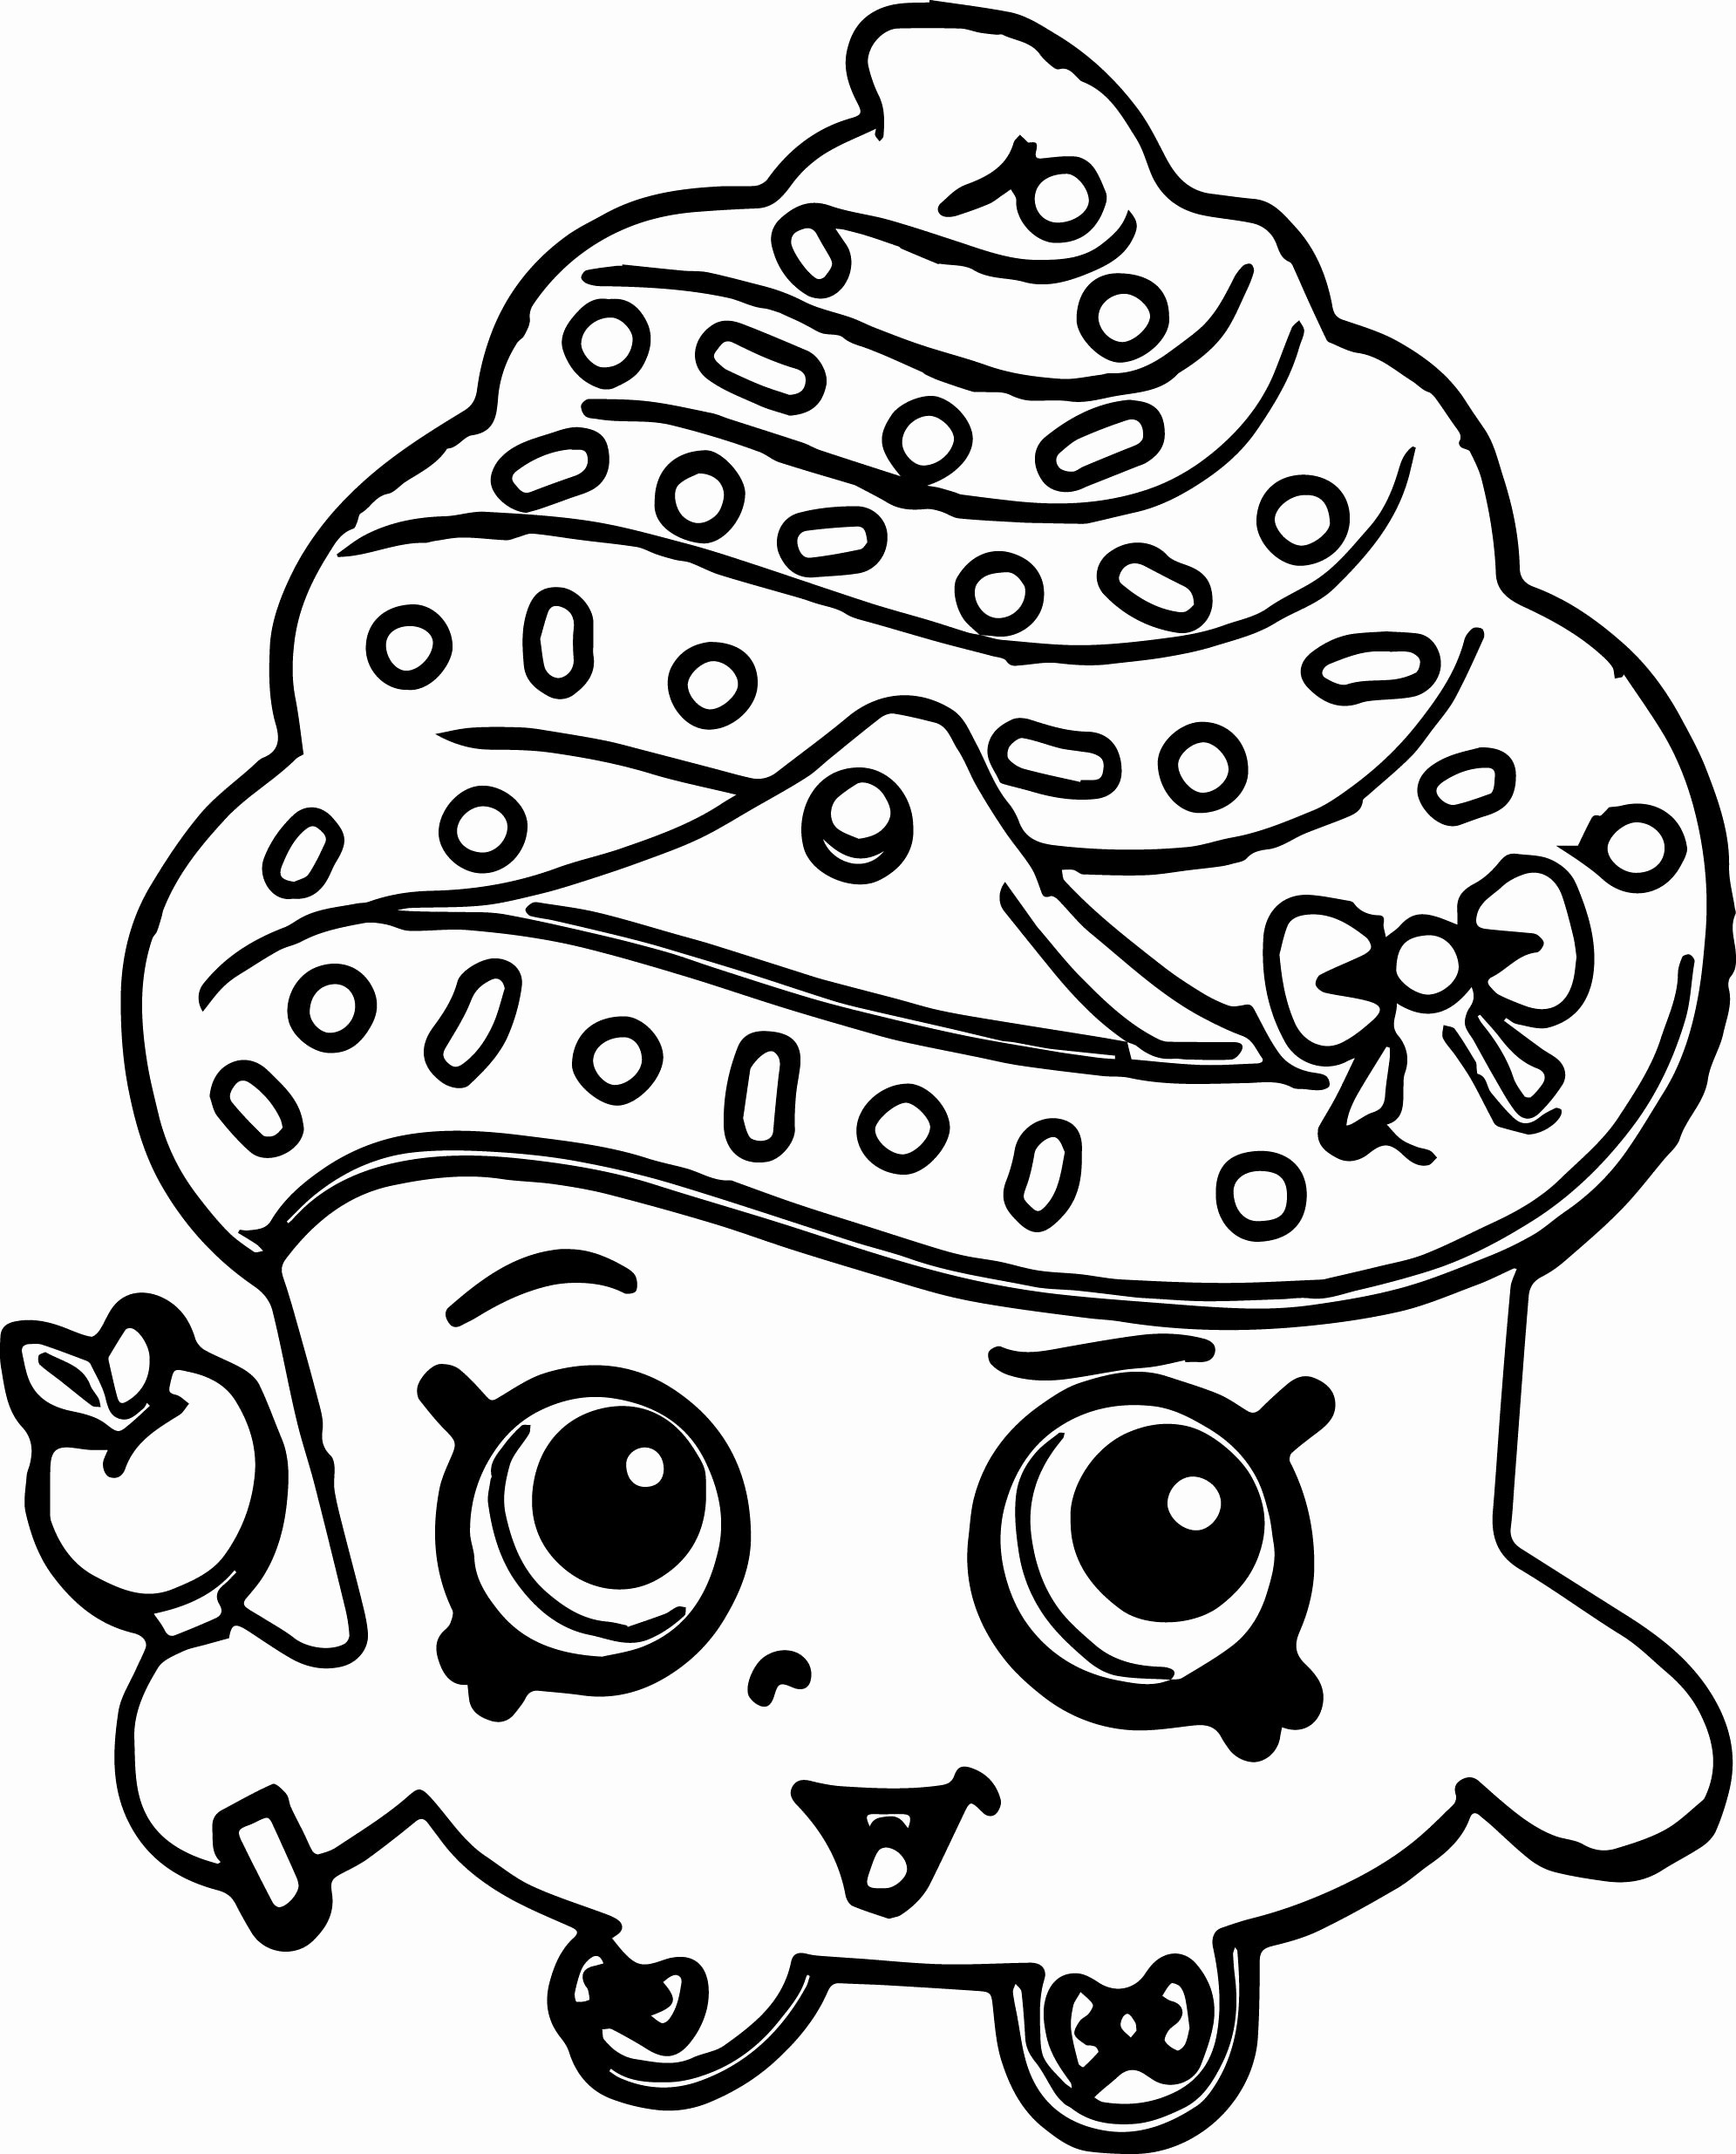 Cute Cupcake Coloring Pages at GetColorings.com | Free ...